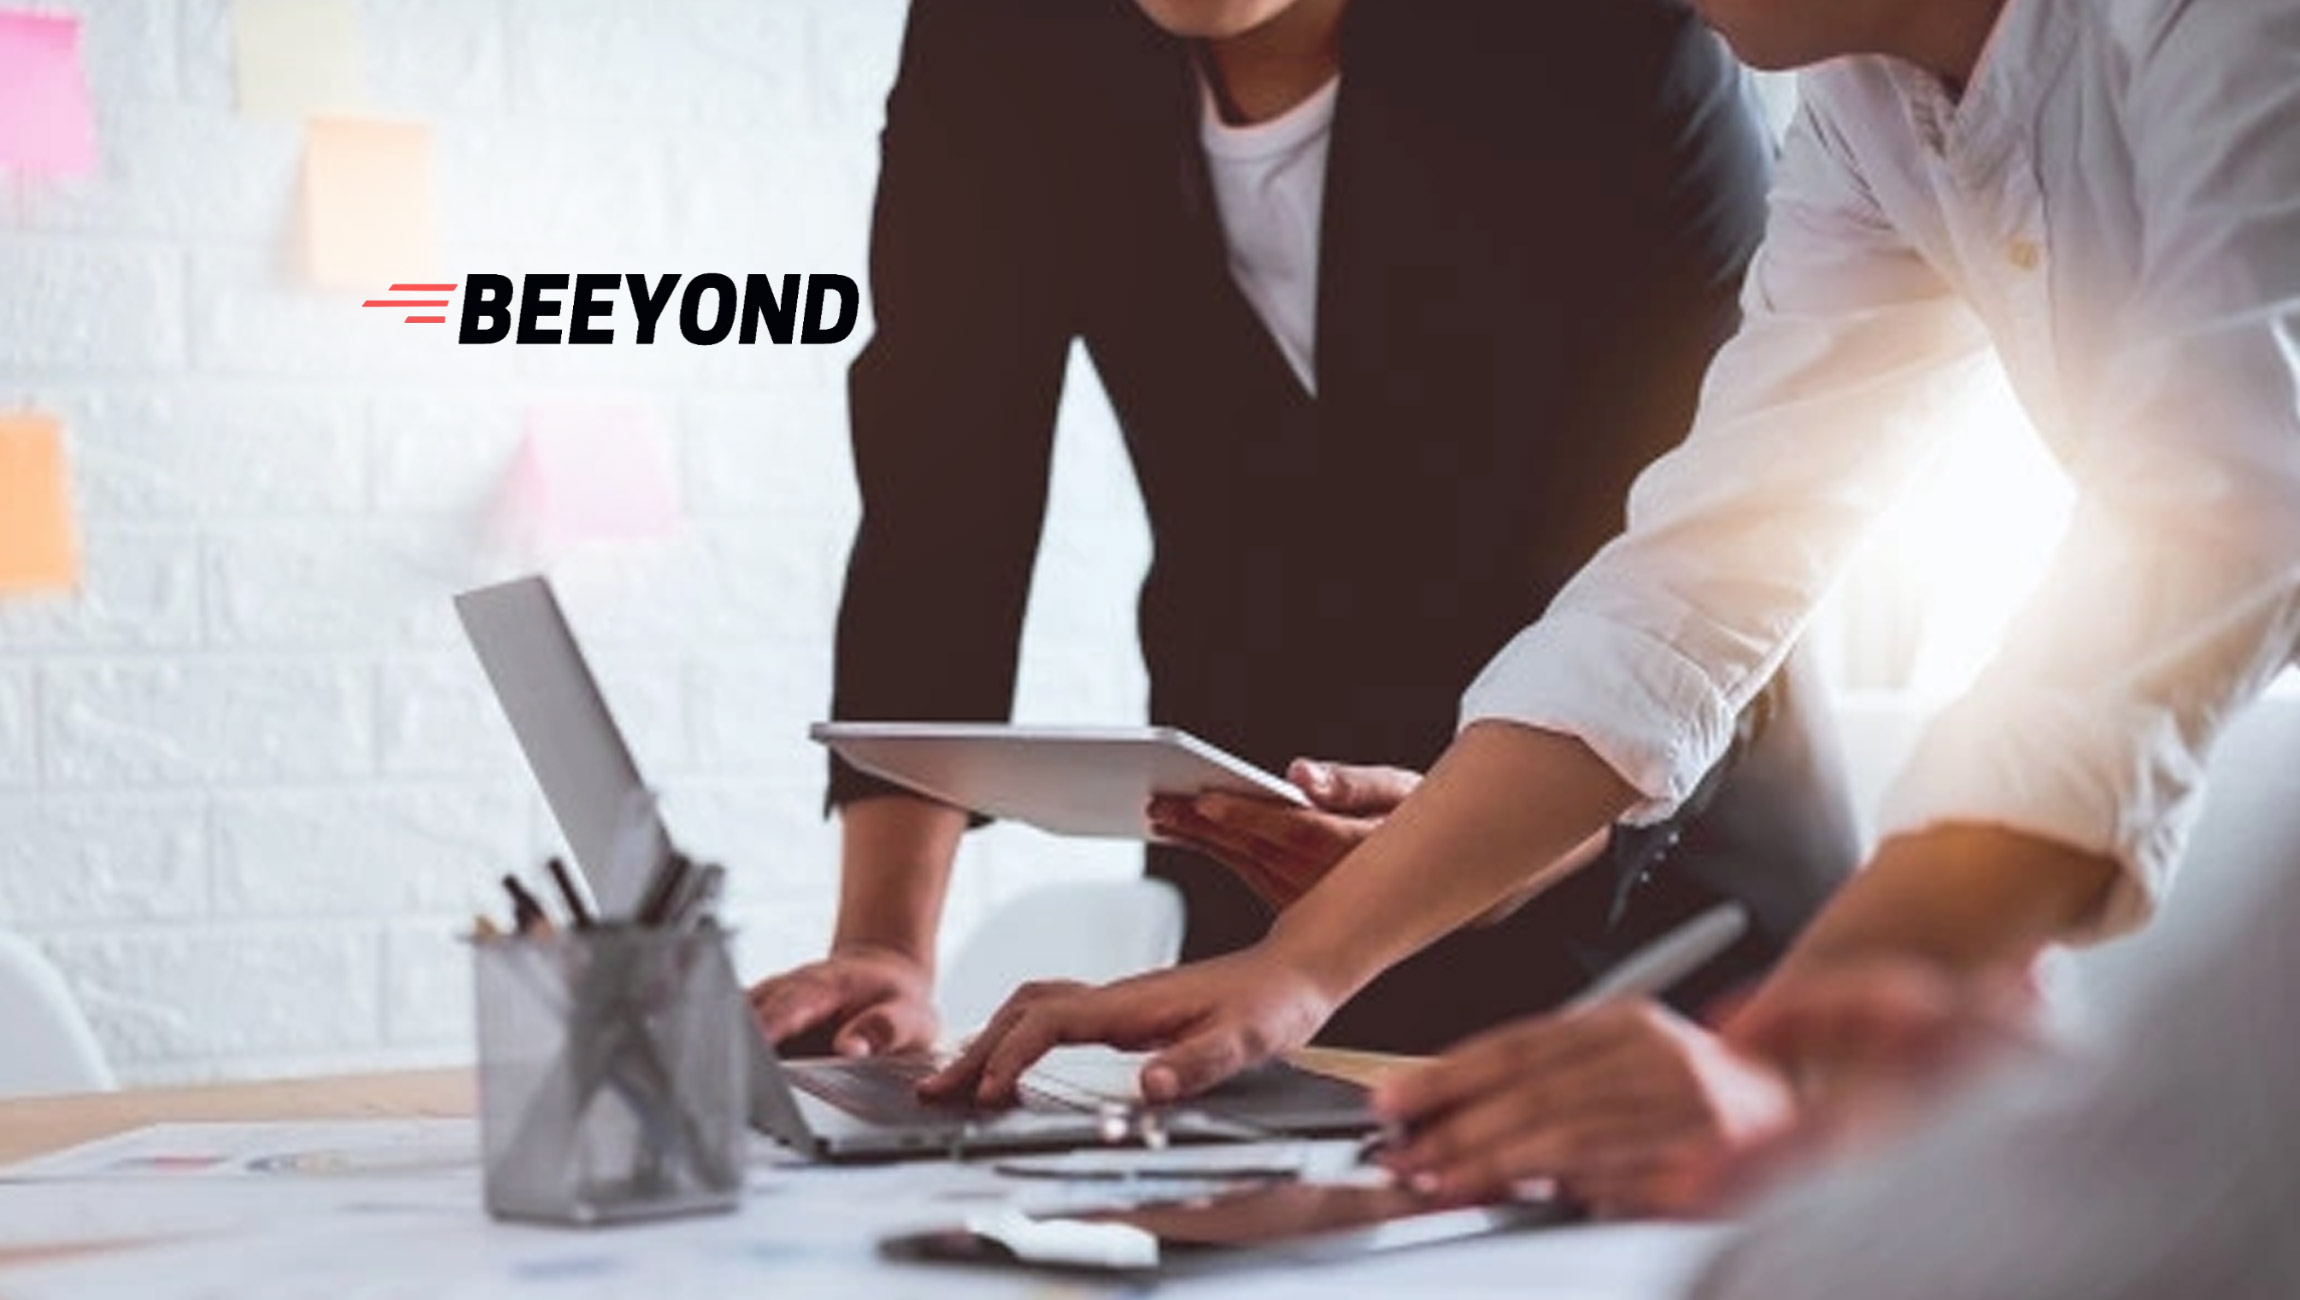 BeeCruise Releases U.S. Shopify Seller-focused App "BEEYOND," Allowing Online Store Operators to Complete Overseas Delivery Simply by Sending Products to Warehouse in Los Angeles